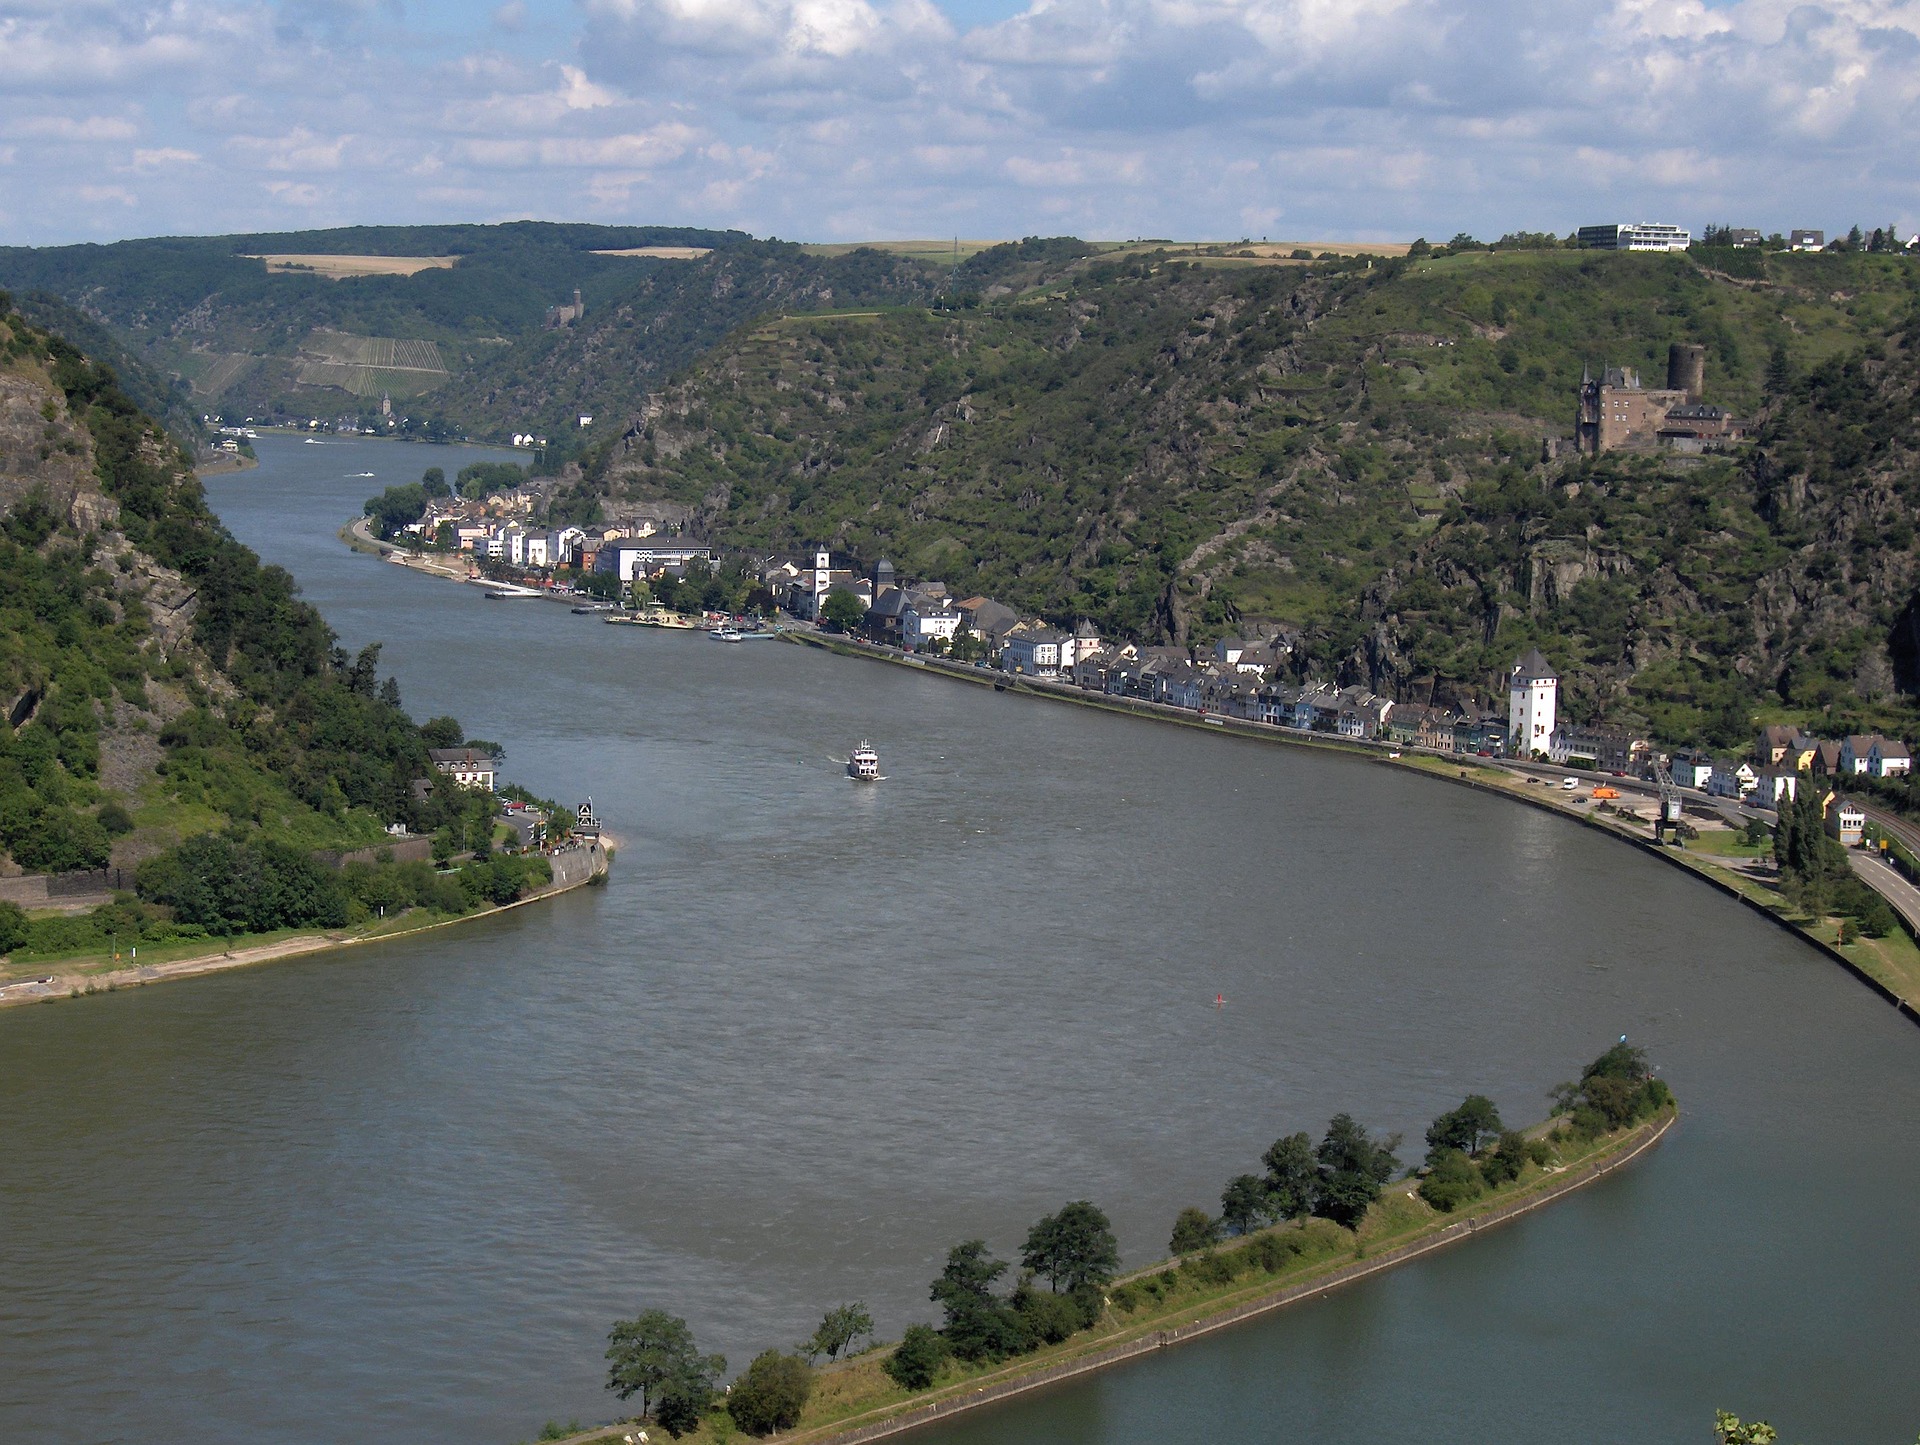 The Upper Middle Rhine Valley, World Heritage Site. hghb, Pixabay